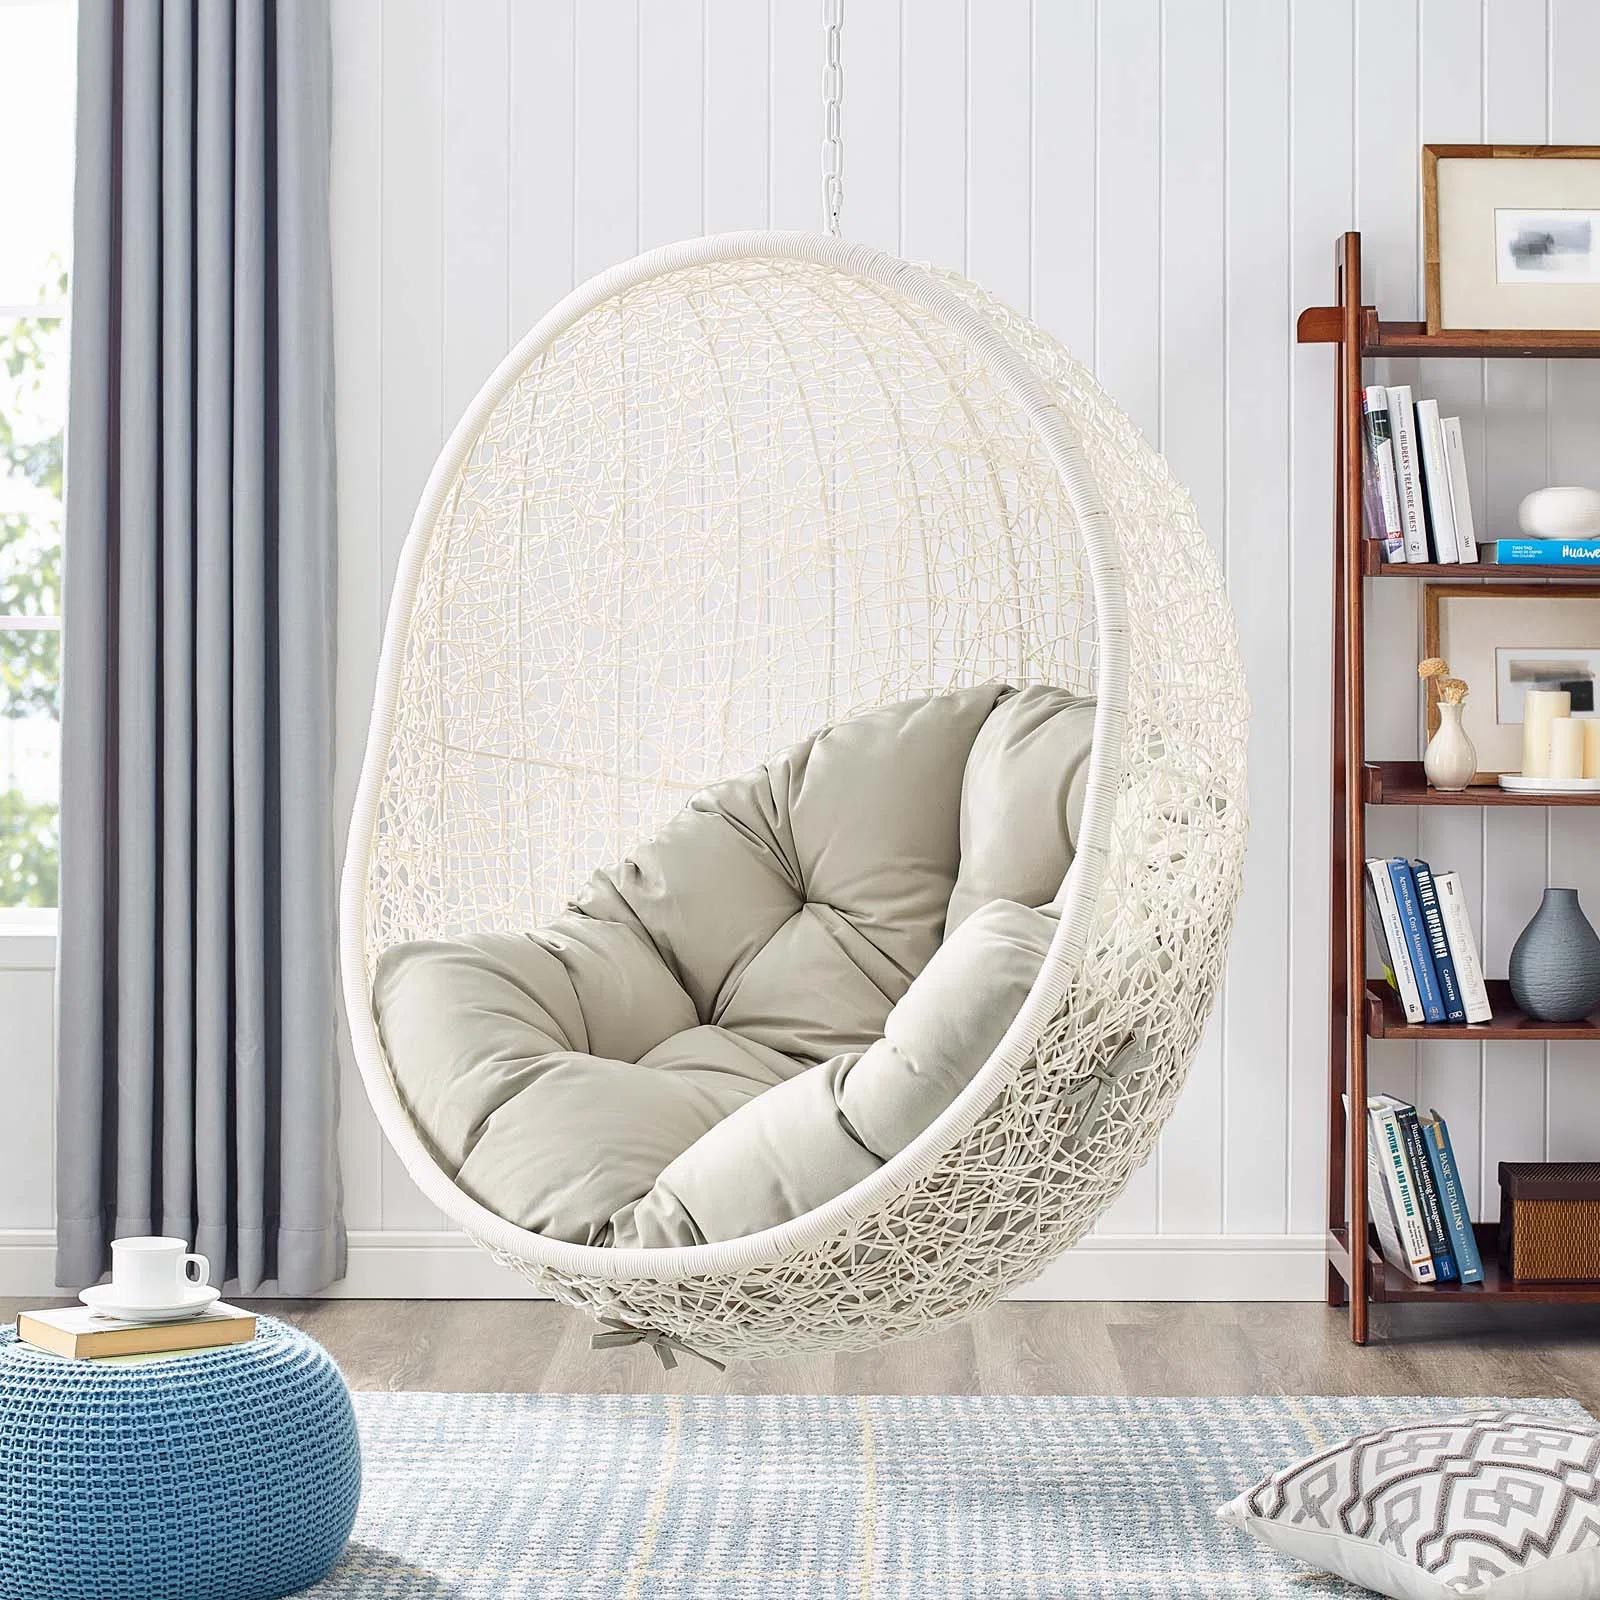 https://www.familyhandyman.com/wp-content/uploads/2023/01/The-5-Best-Hanging-Chairs-for-Your-Home_ft_via-wayfair.com_.jpg?fit=700%2C700